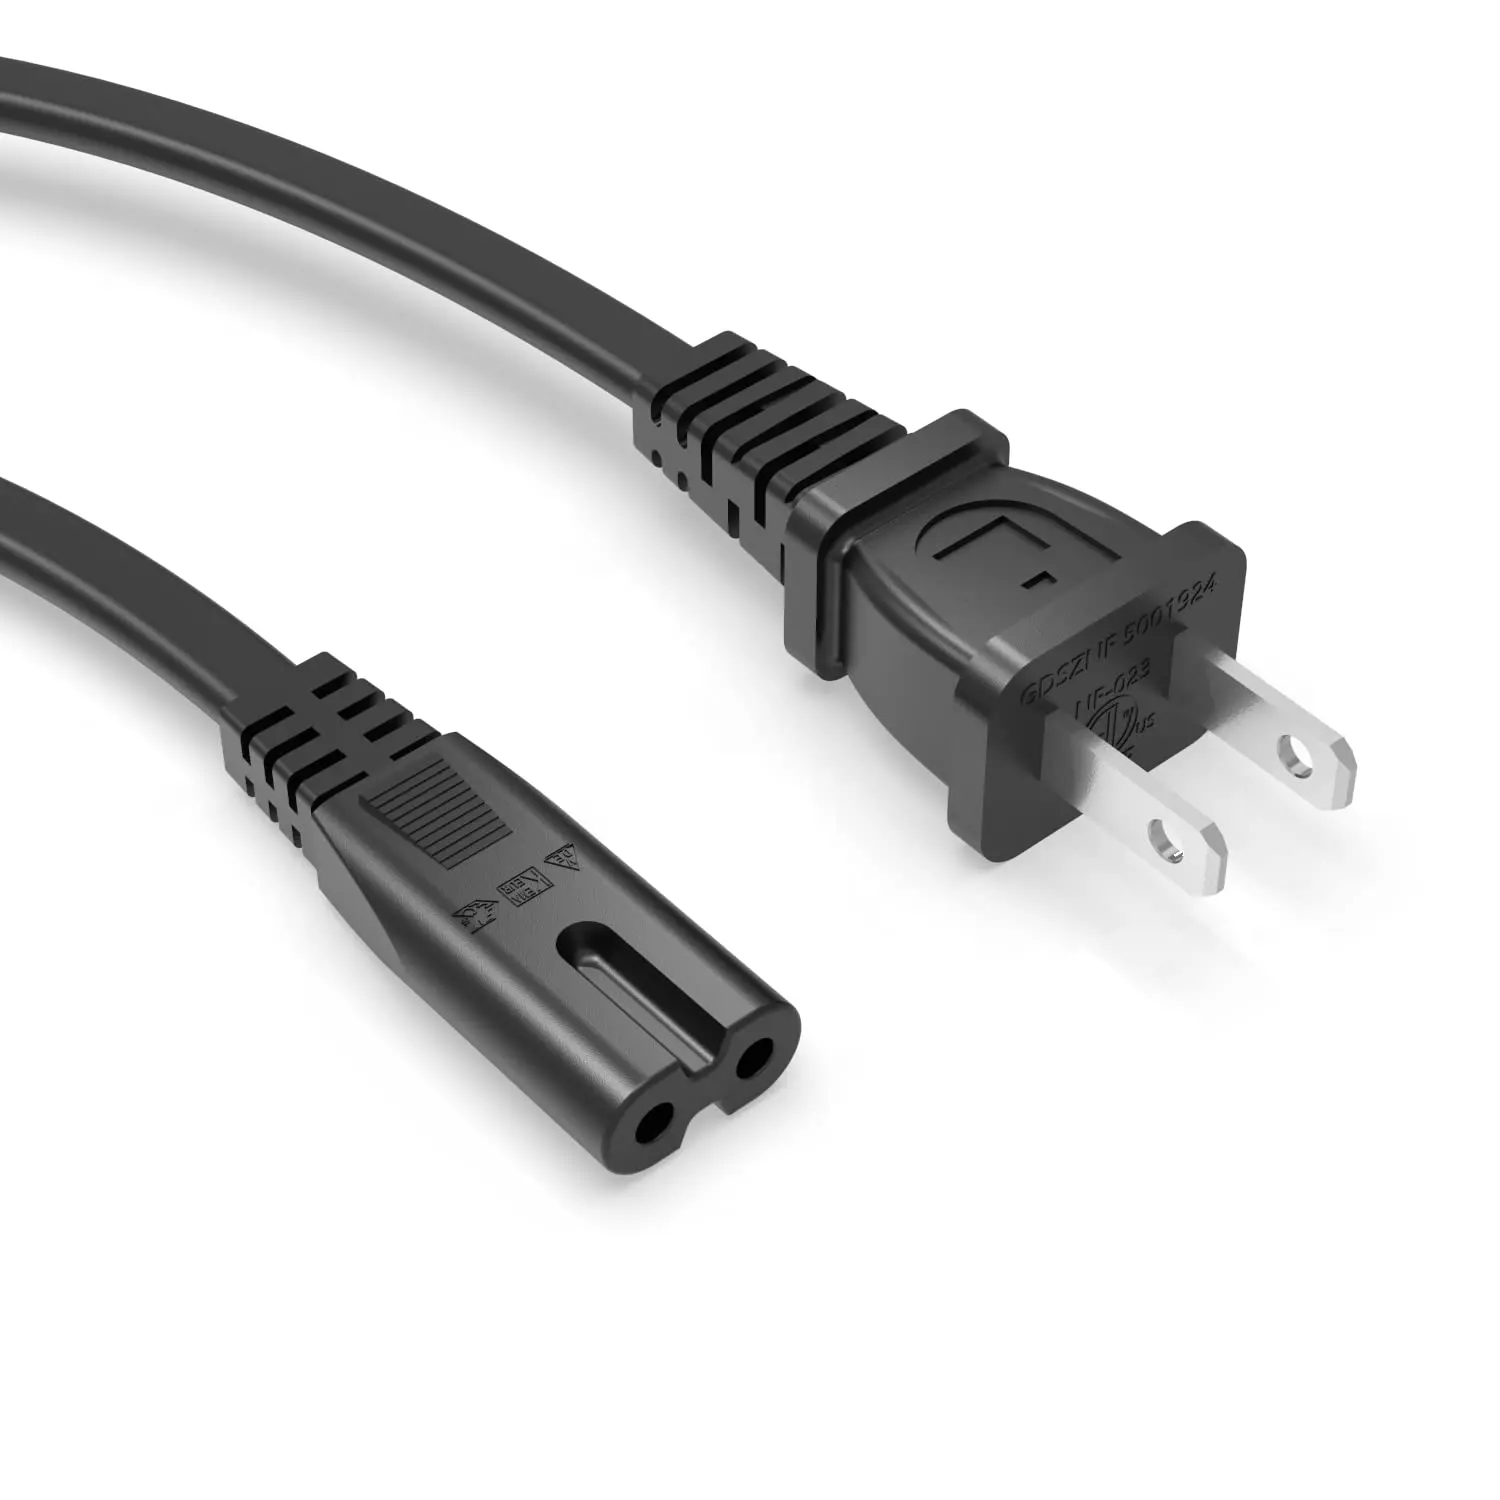 hewlett packard printer cord - What kind of cord do I need to connect printer to computer